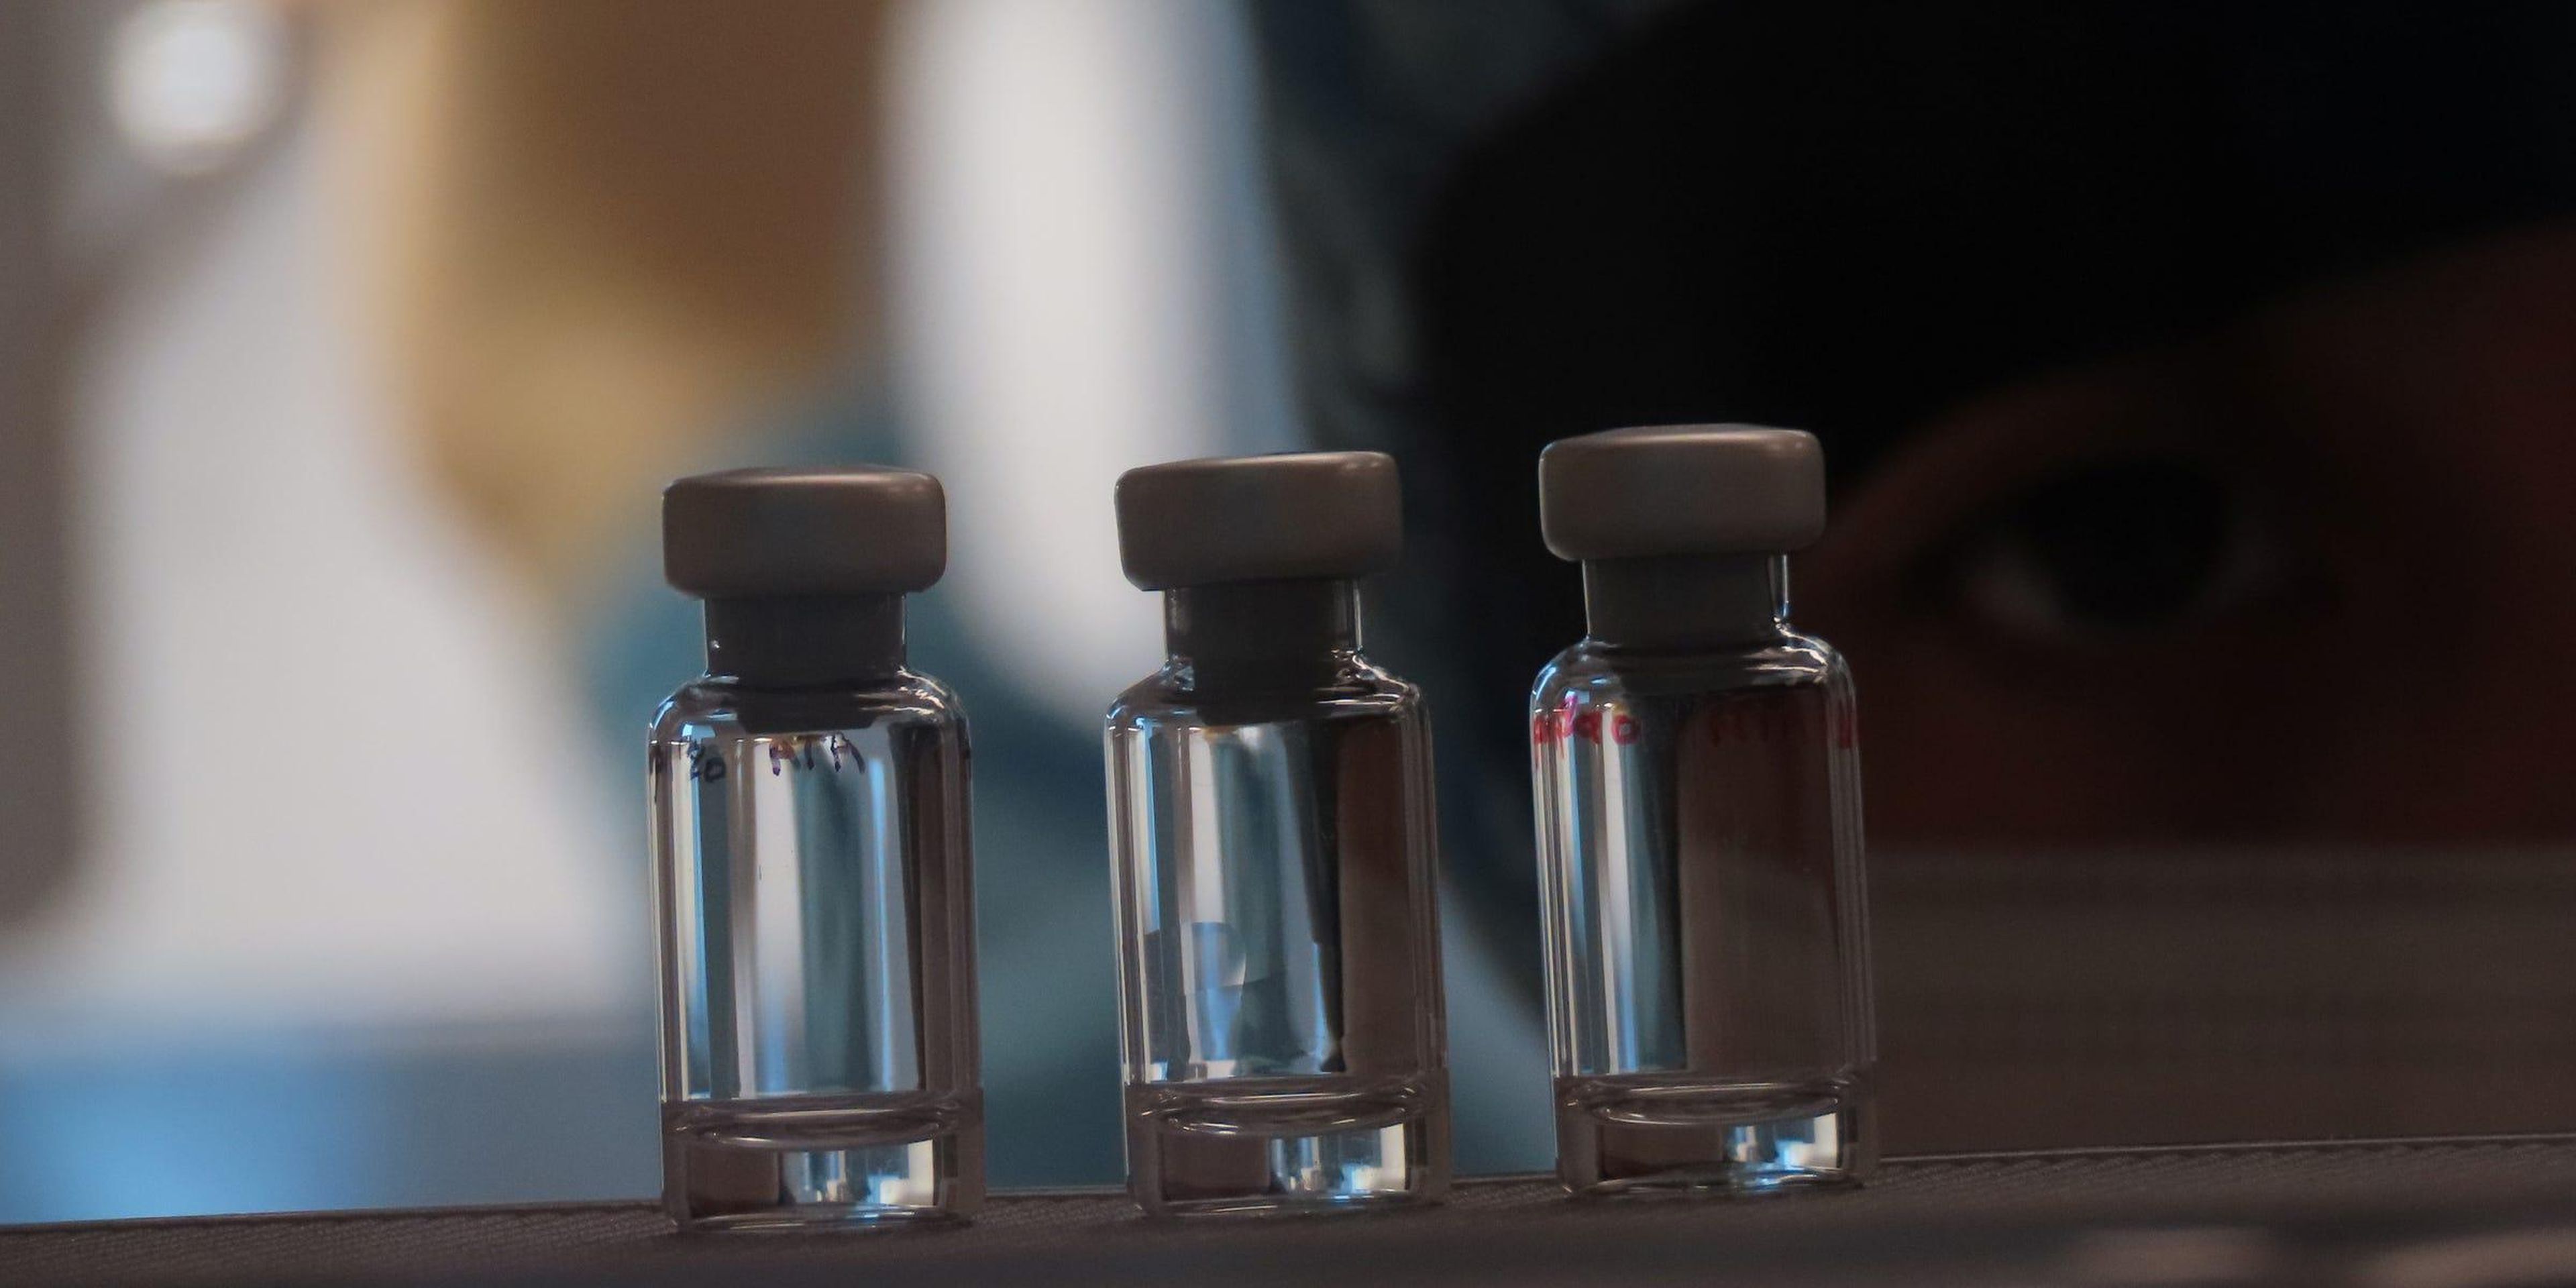 A row of vaccine vials at the Clinical Biomanufacturing Facility in Oxford, England, on April 2, 2020.